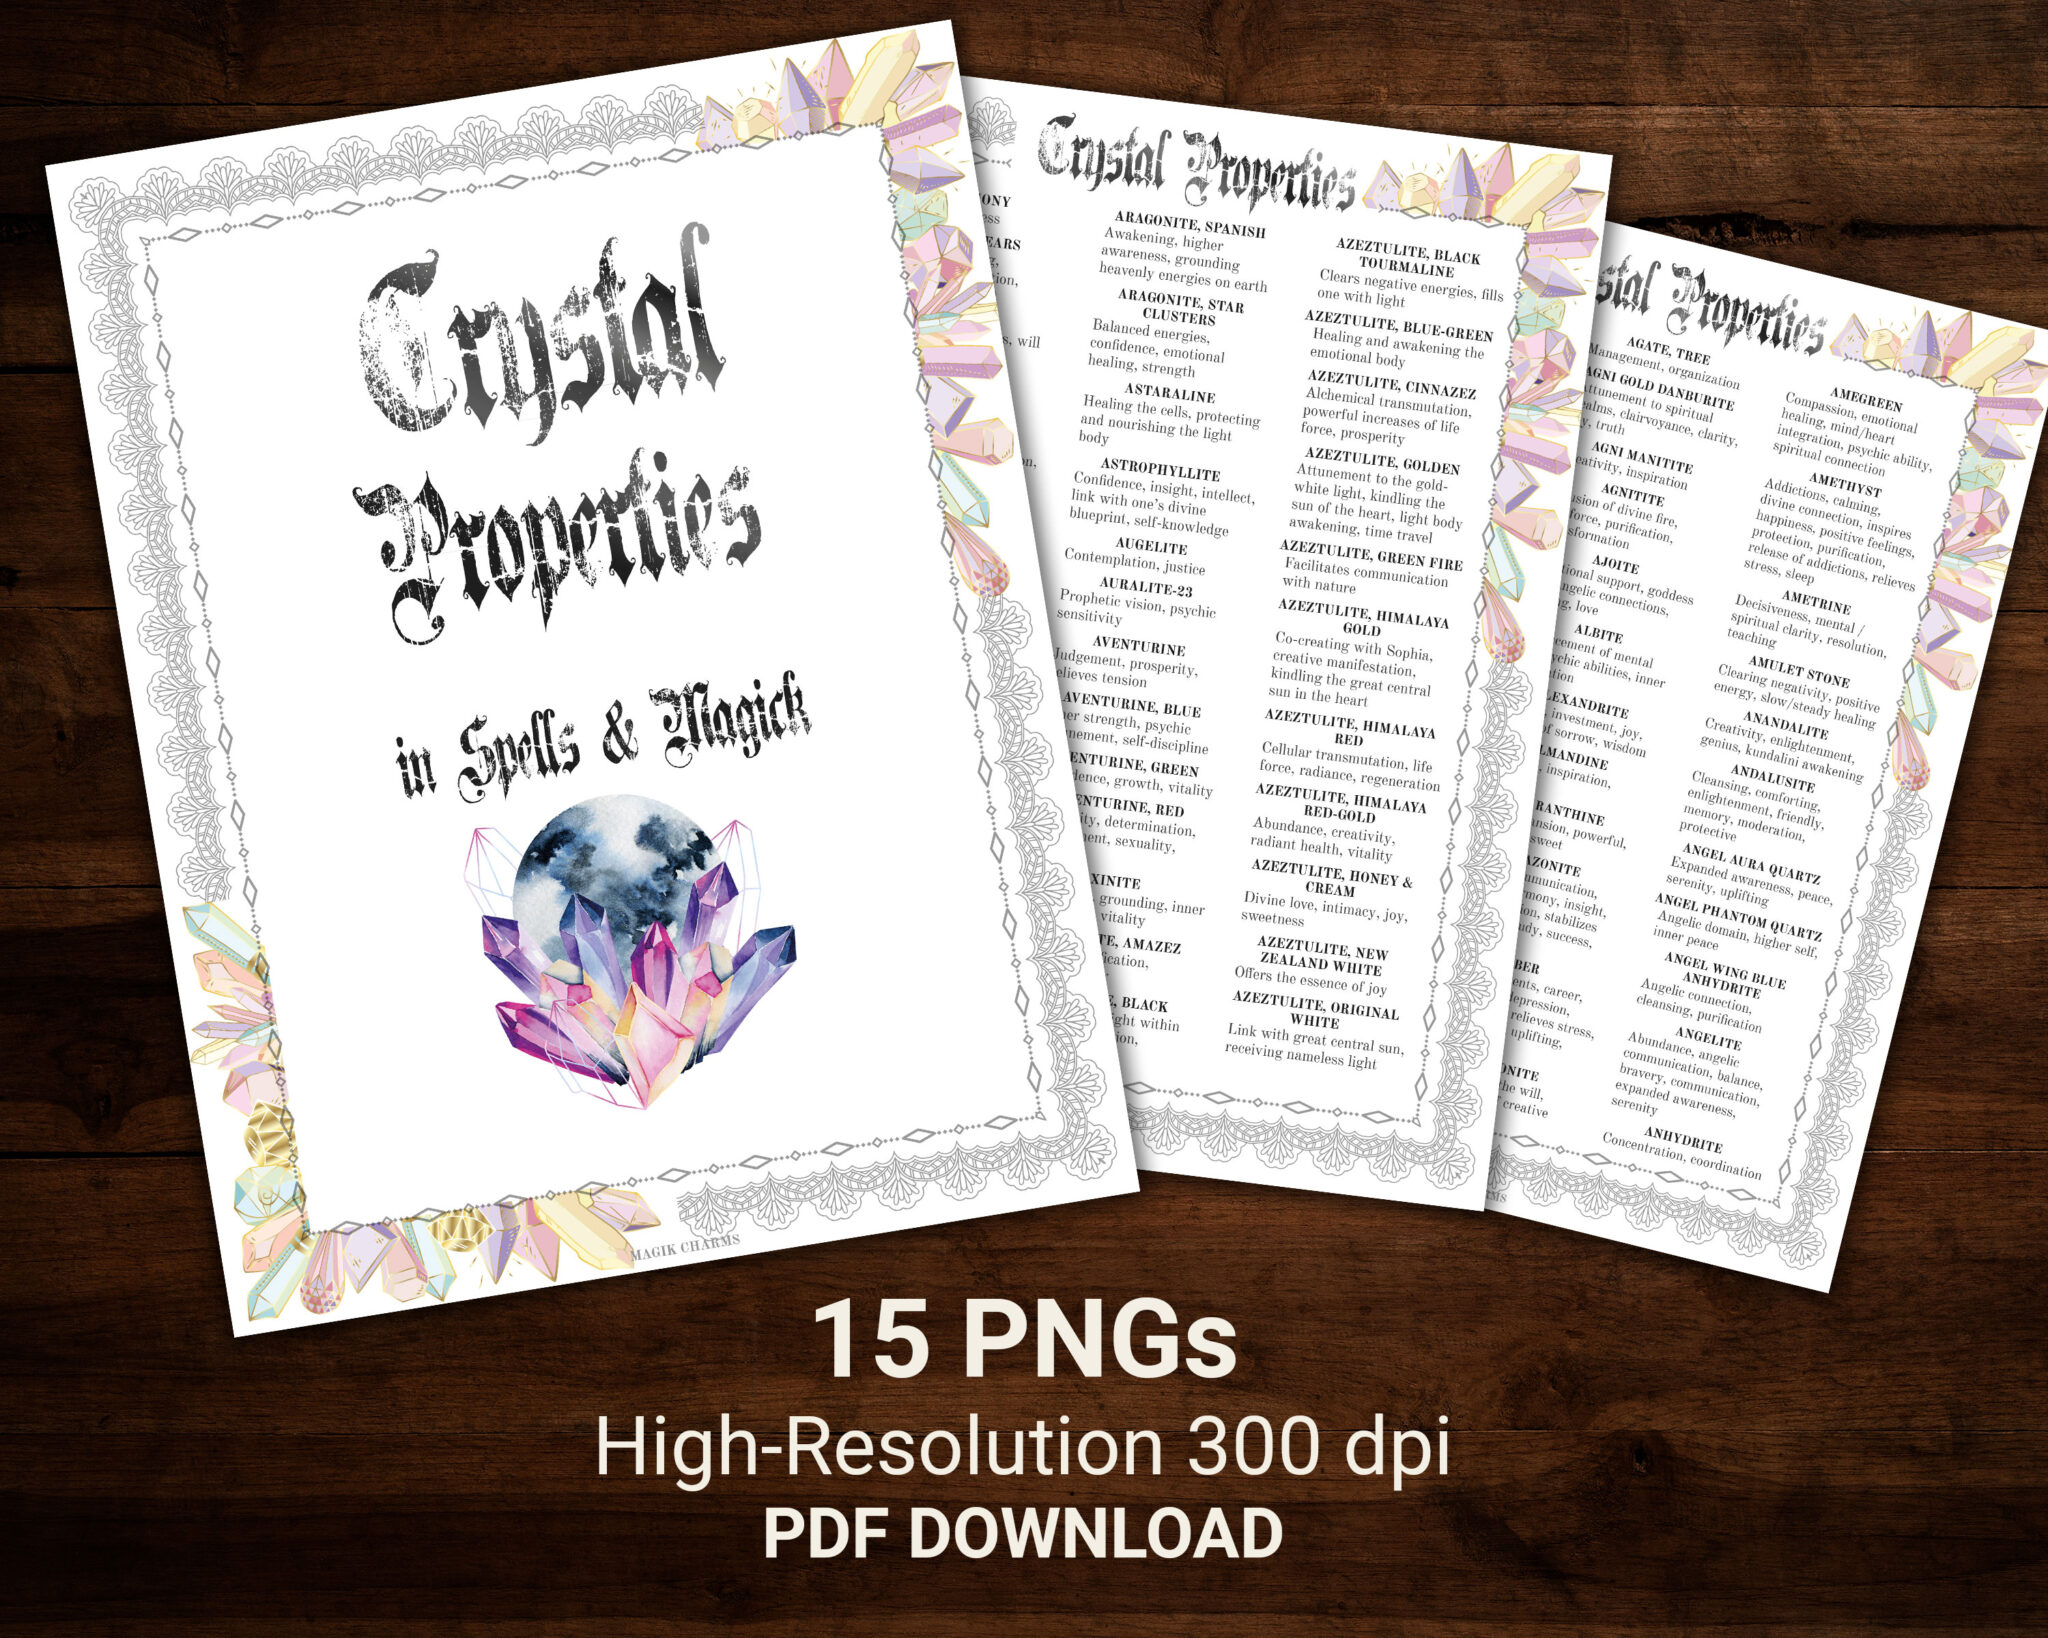 Crystals metaphysical associations grimoire pages